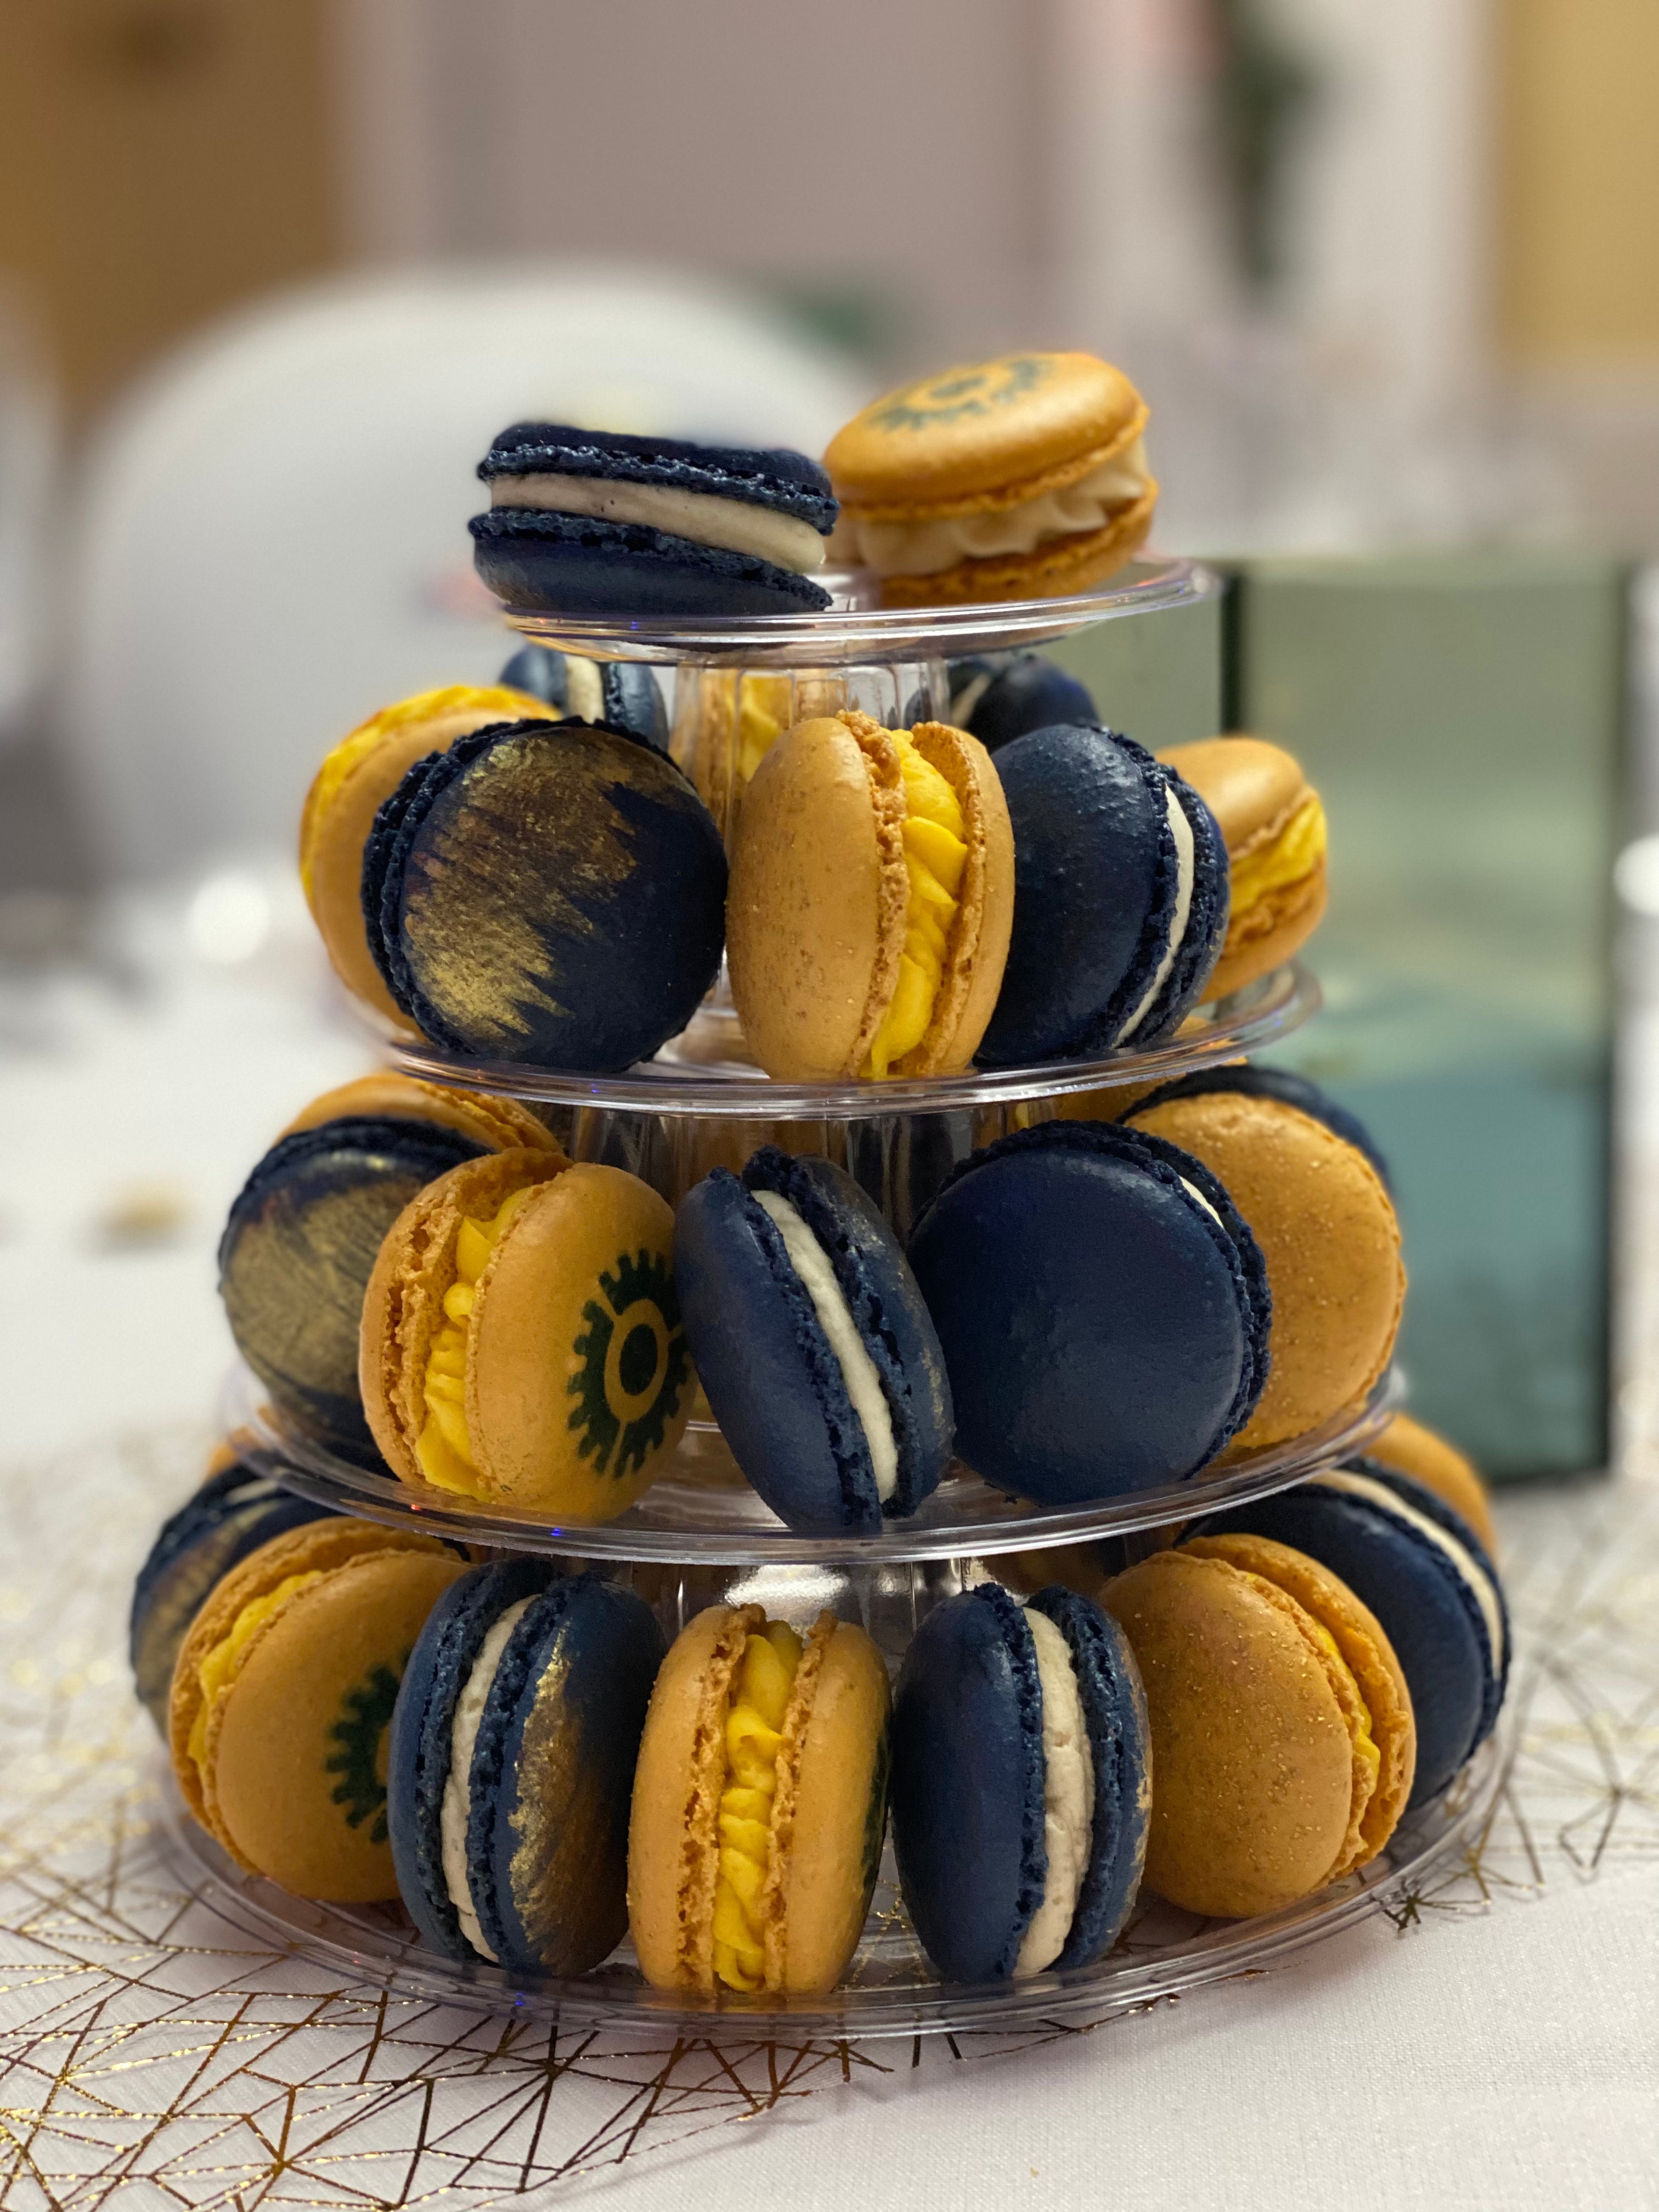 Macaron Tower - including approx 35 macarons